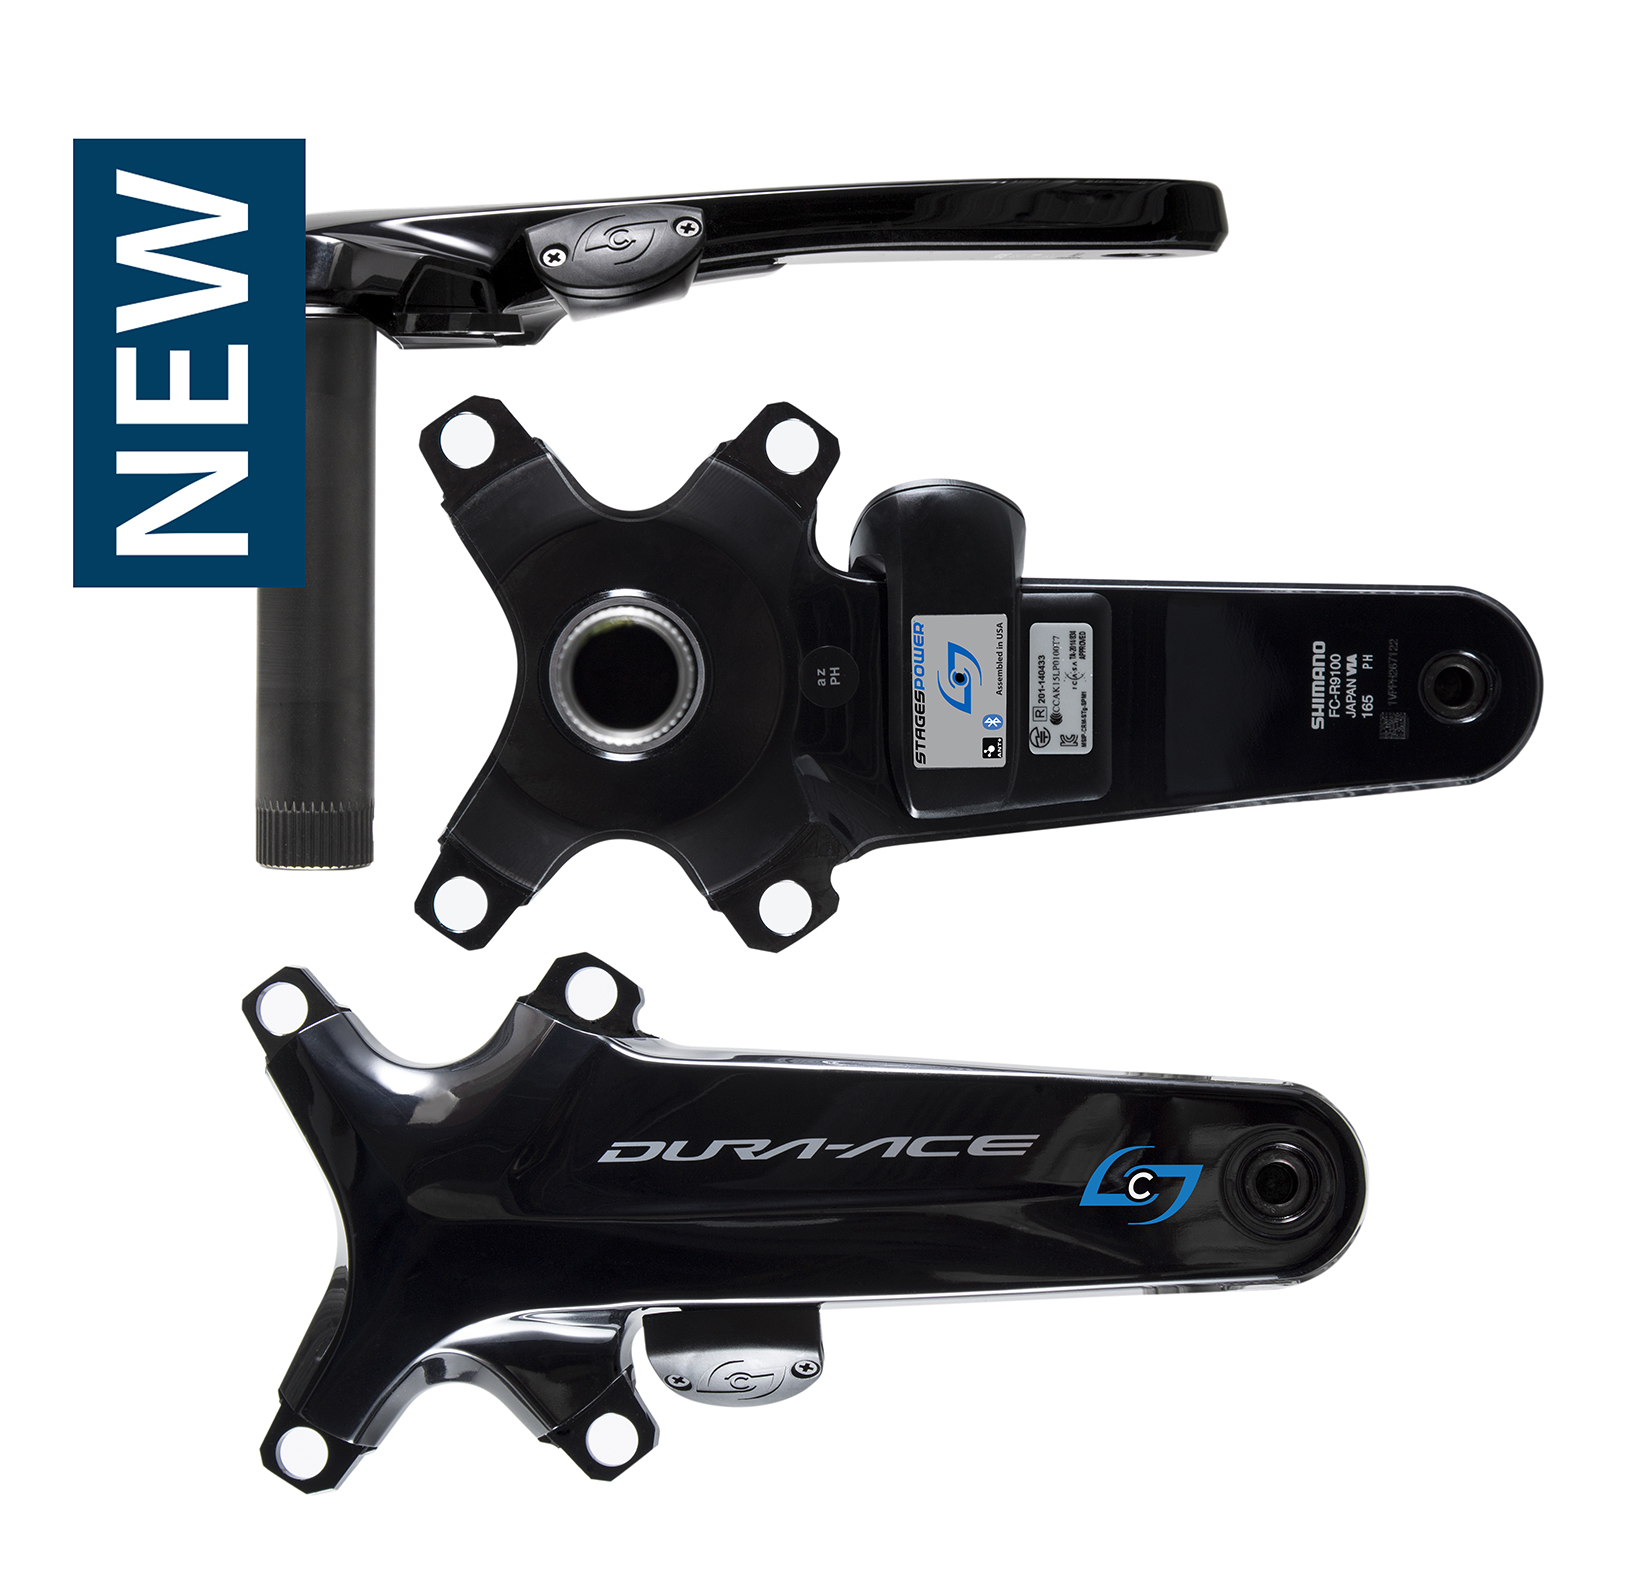 Stages Dura-Ace right side power meter